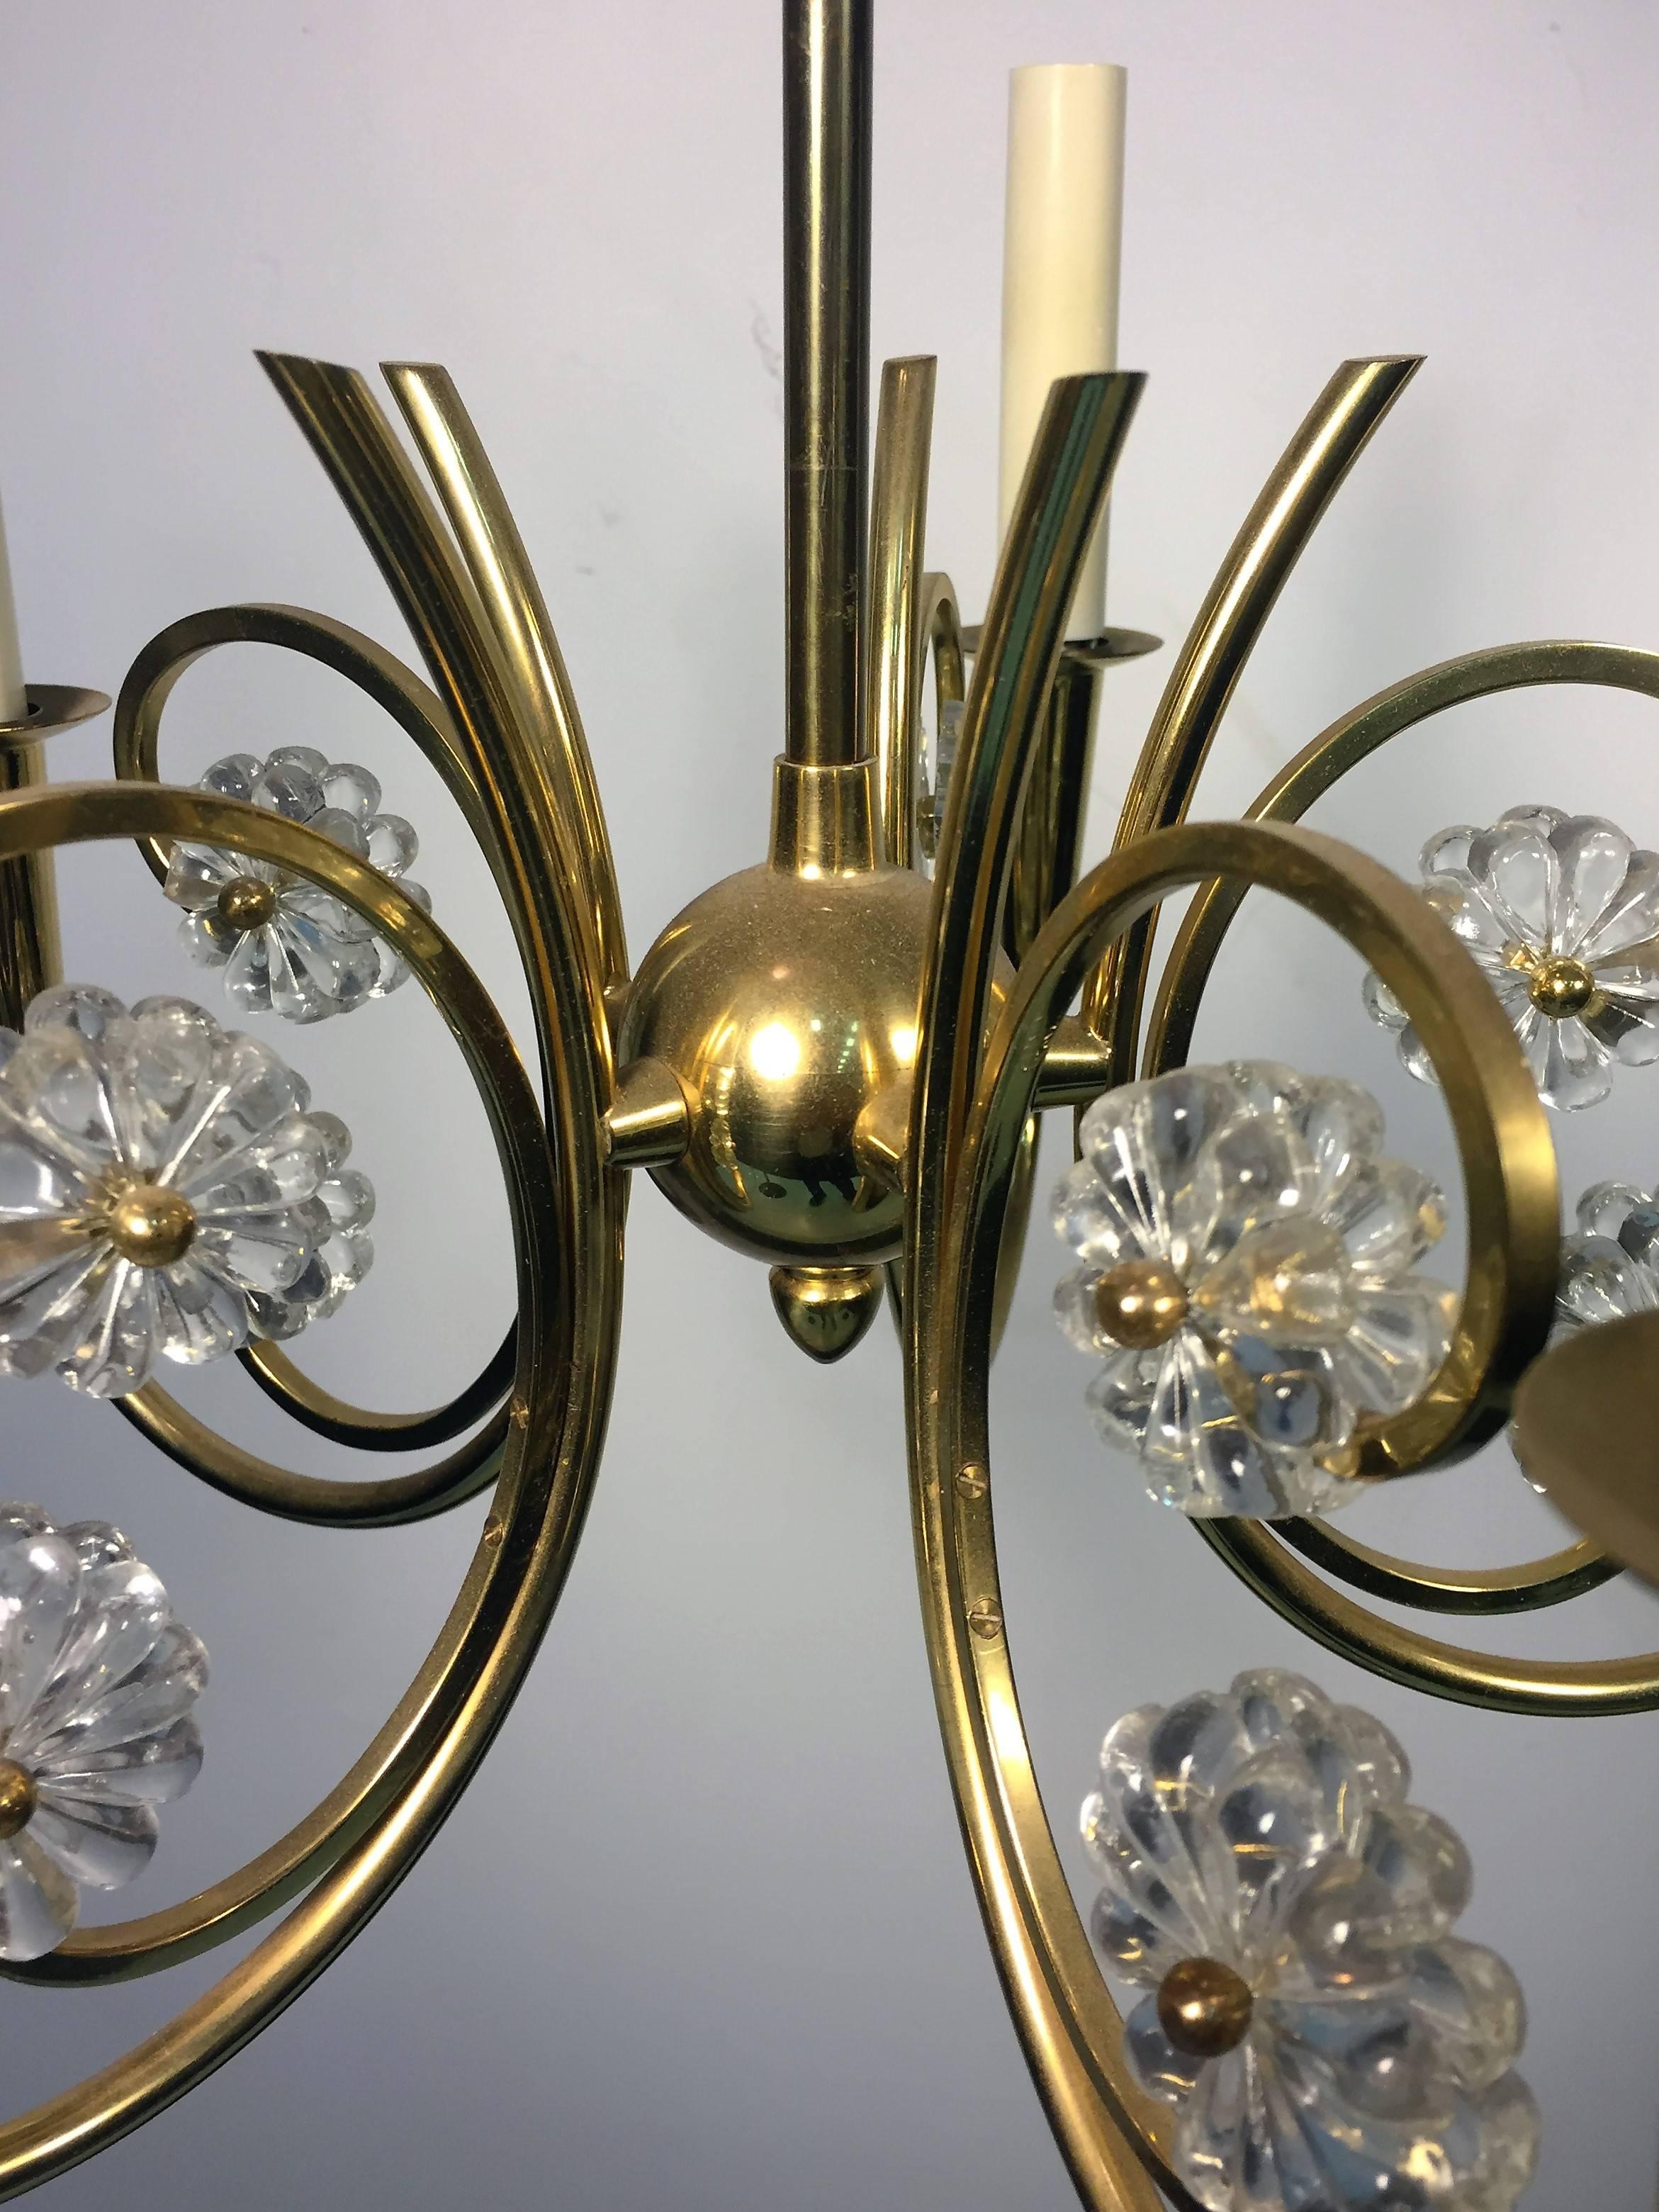 Fantastic diminutive pair of high style polished brass and clear crystal floret design five-arm chandeliers with curved tendril design arms and brass ball accented florets. Accompanied by their original beautiful solid brass canopies reminiscent of